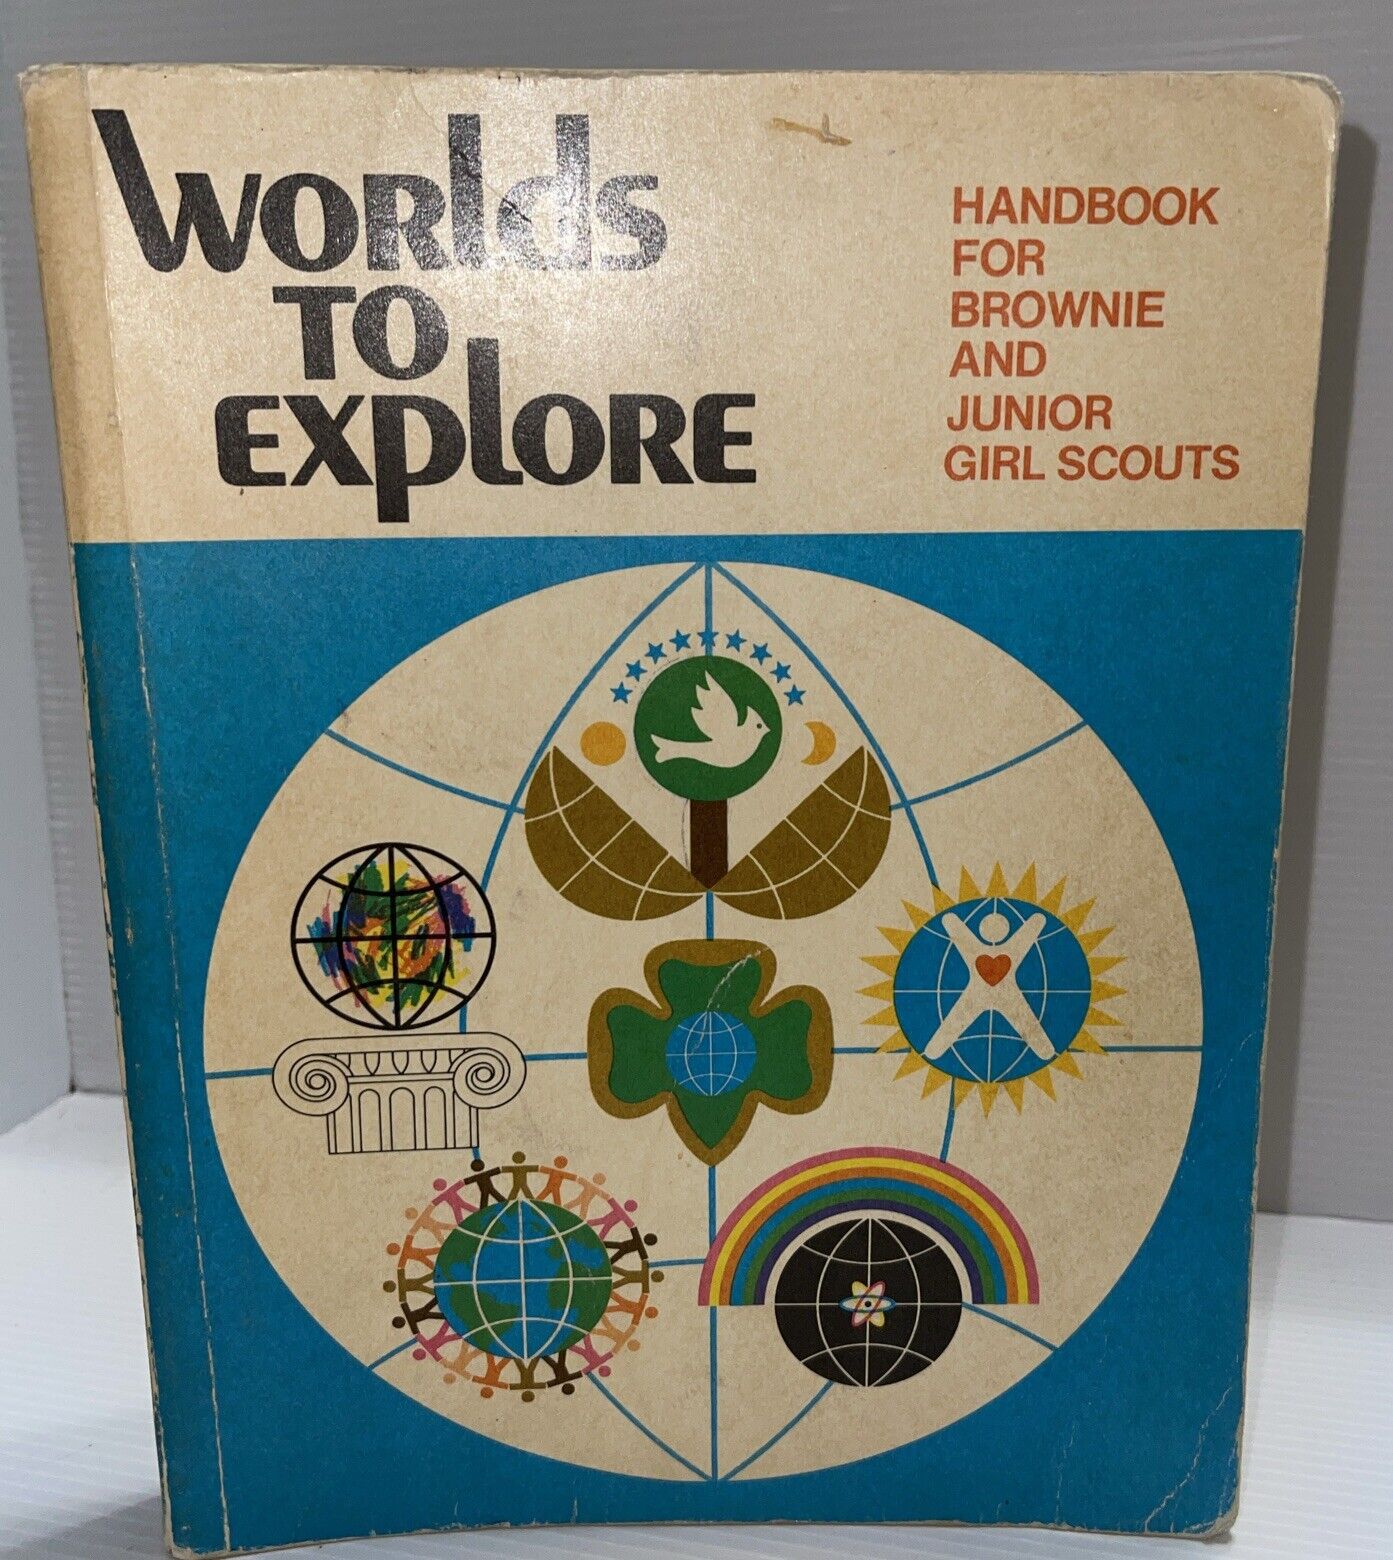 Vintage 1977 GIRL SCOUT HANDBOOK BROWNIE AND JUNIOR - WORLDS TO EXPLORE